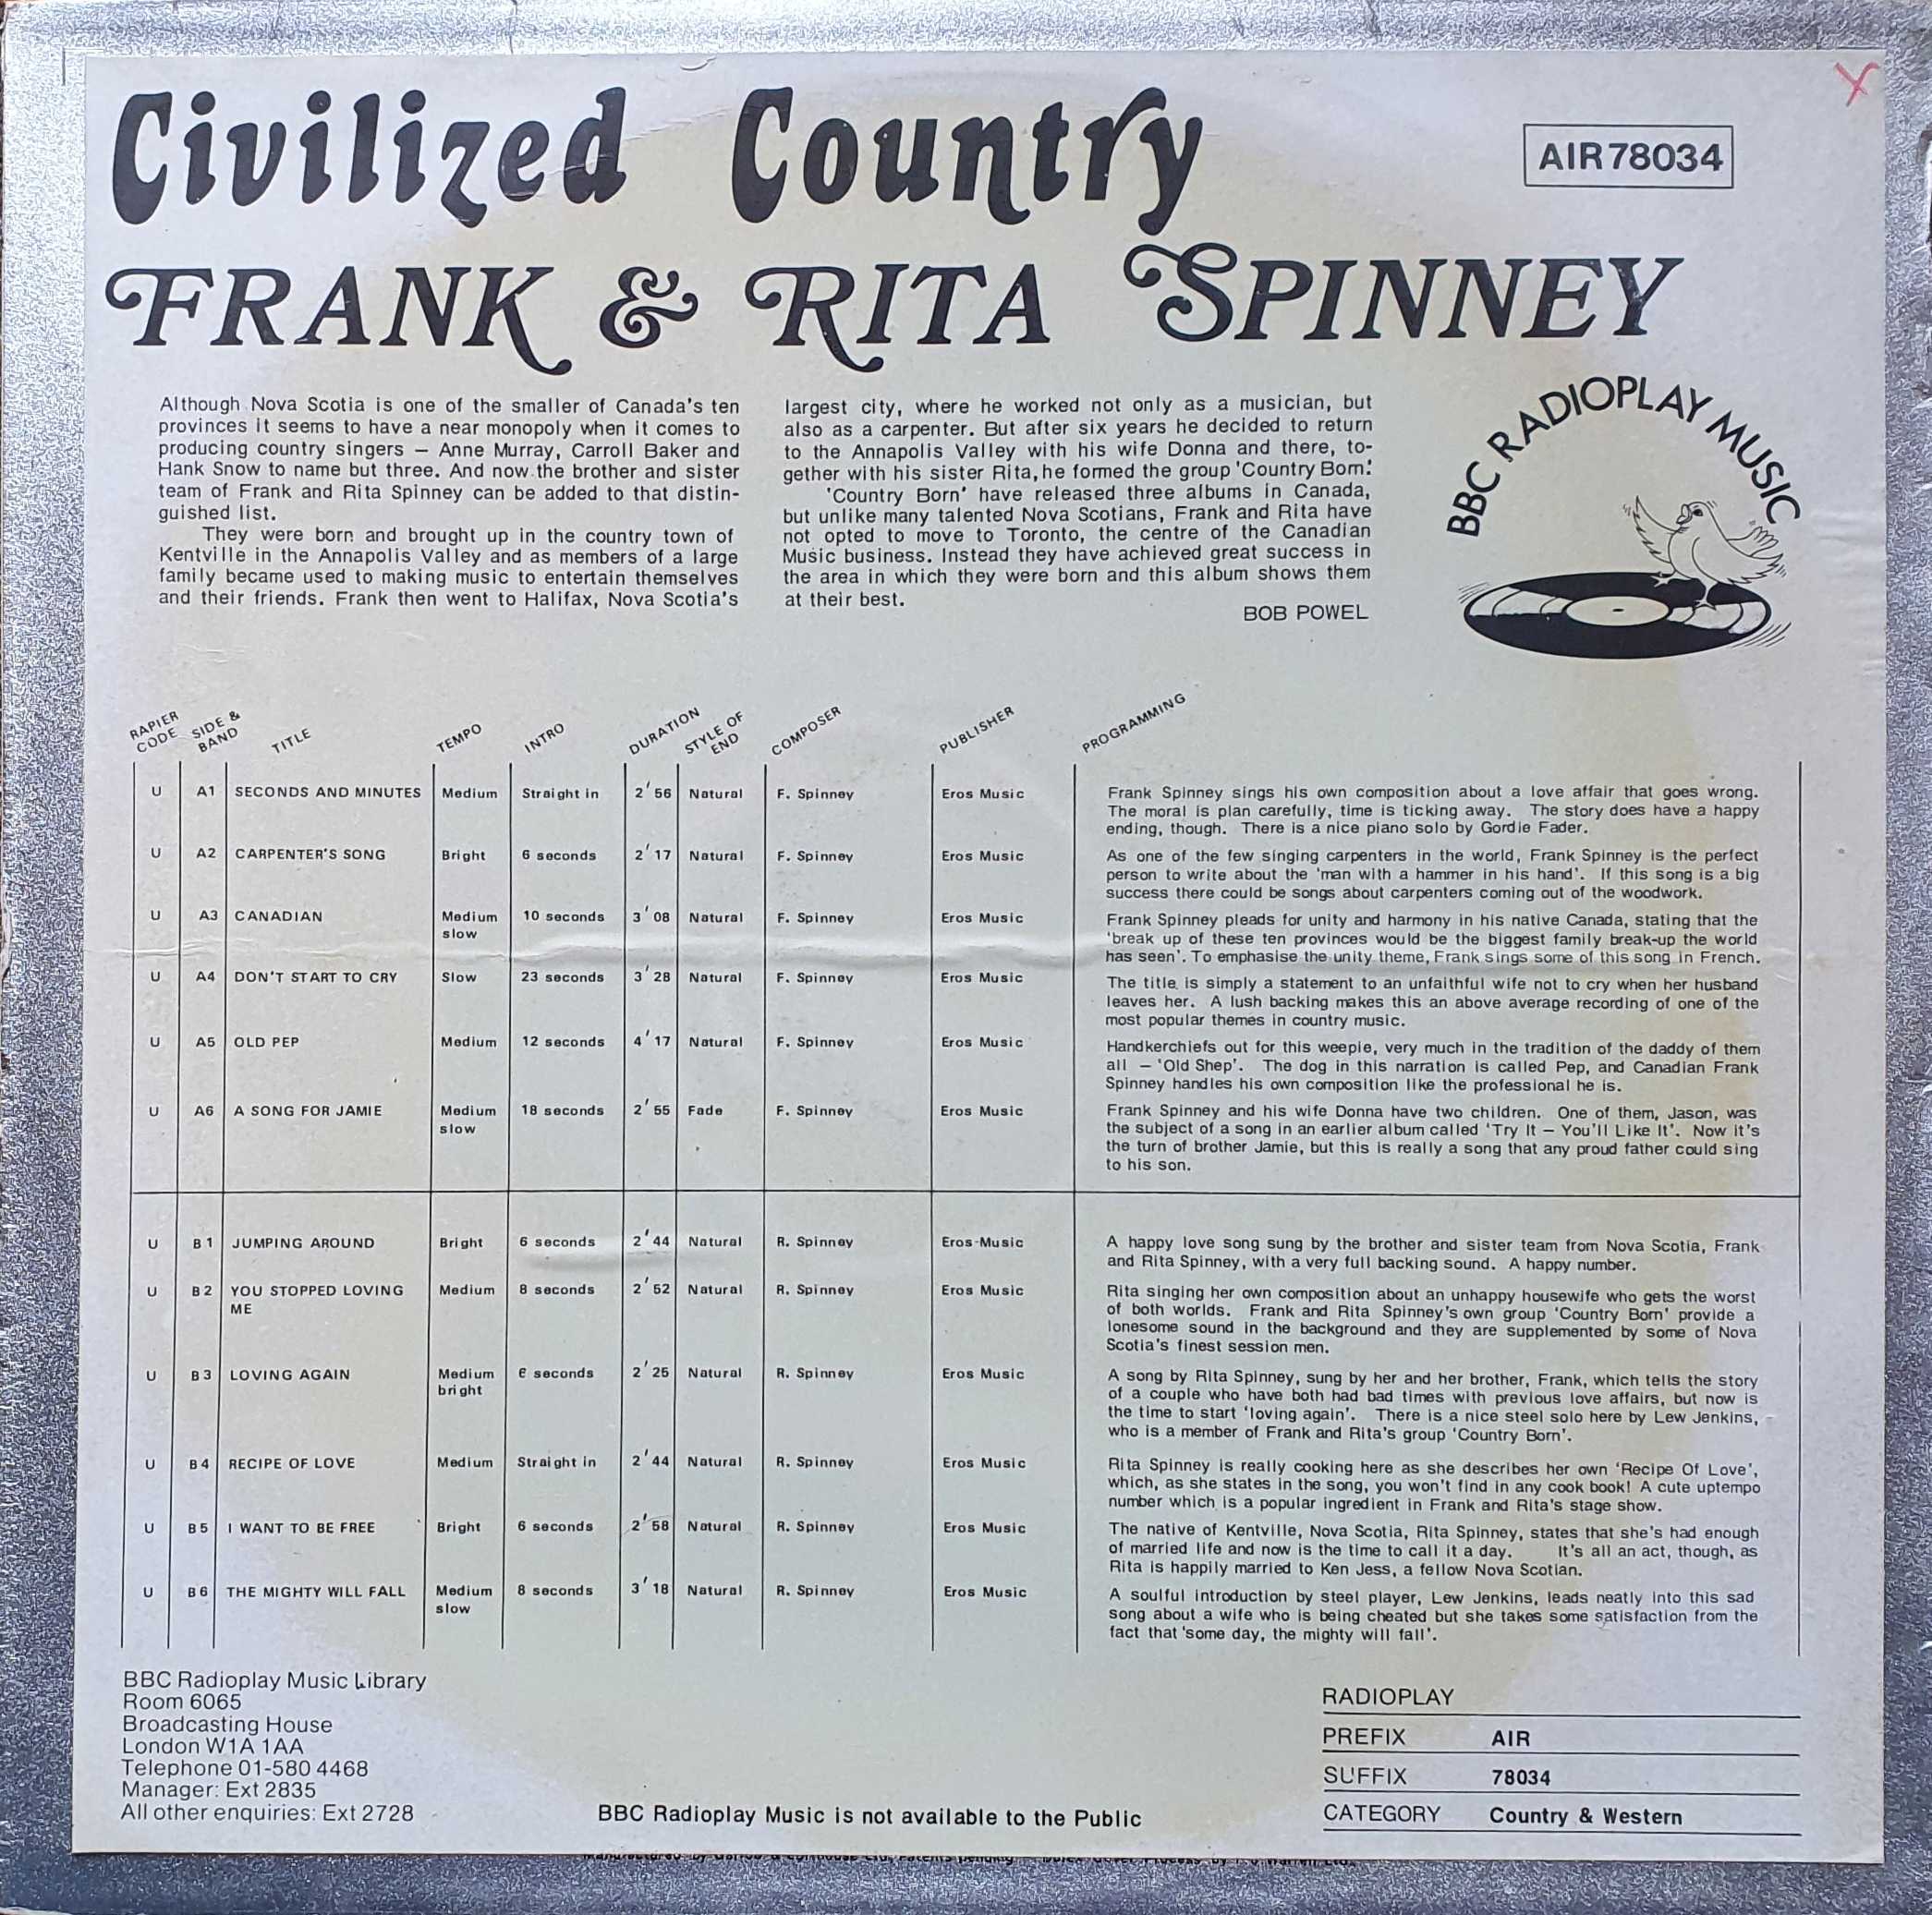 Picture of AIR 78034 Civilised country by artist F. Spinney / R. Spinney from the BBC records and Tapes library